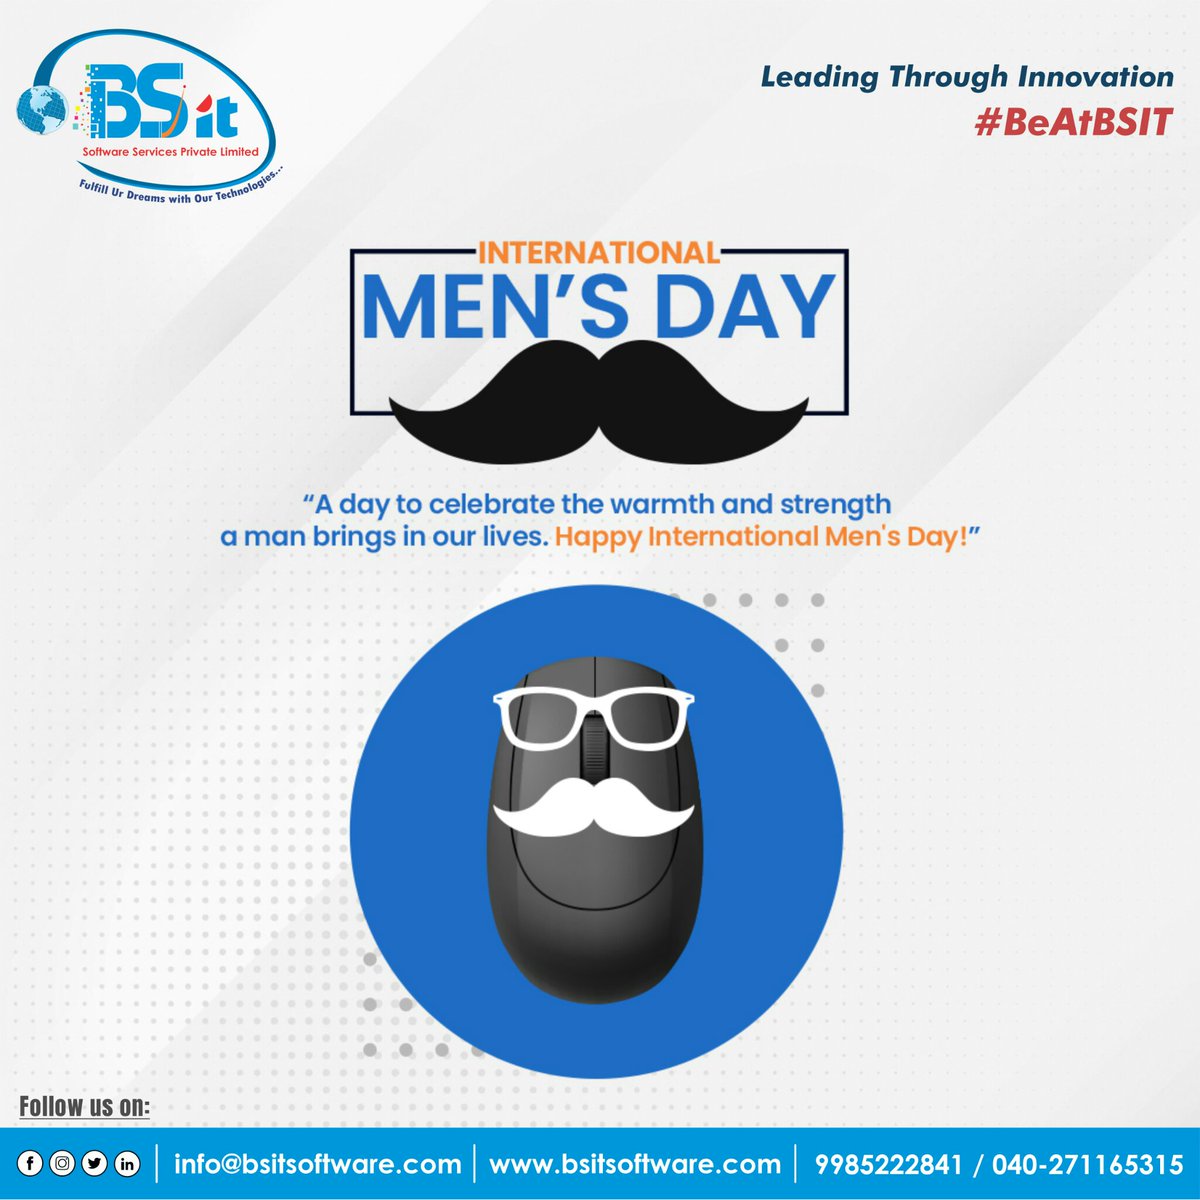 Team BSIT - wishes a very Happy International Men's Day to all the men out there!👨‍💼
#InternationalMensDay #internationalmensday2022 #happymensday #HappyInternationalMensDay #MensDay #IMD2022 #entrepreneur #businessmen #BeAtBSIT #bsitsoftware #bsitsoftwareservices #TeamBSIT #bsit